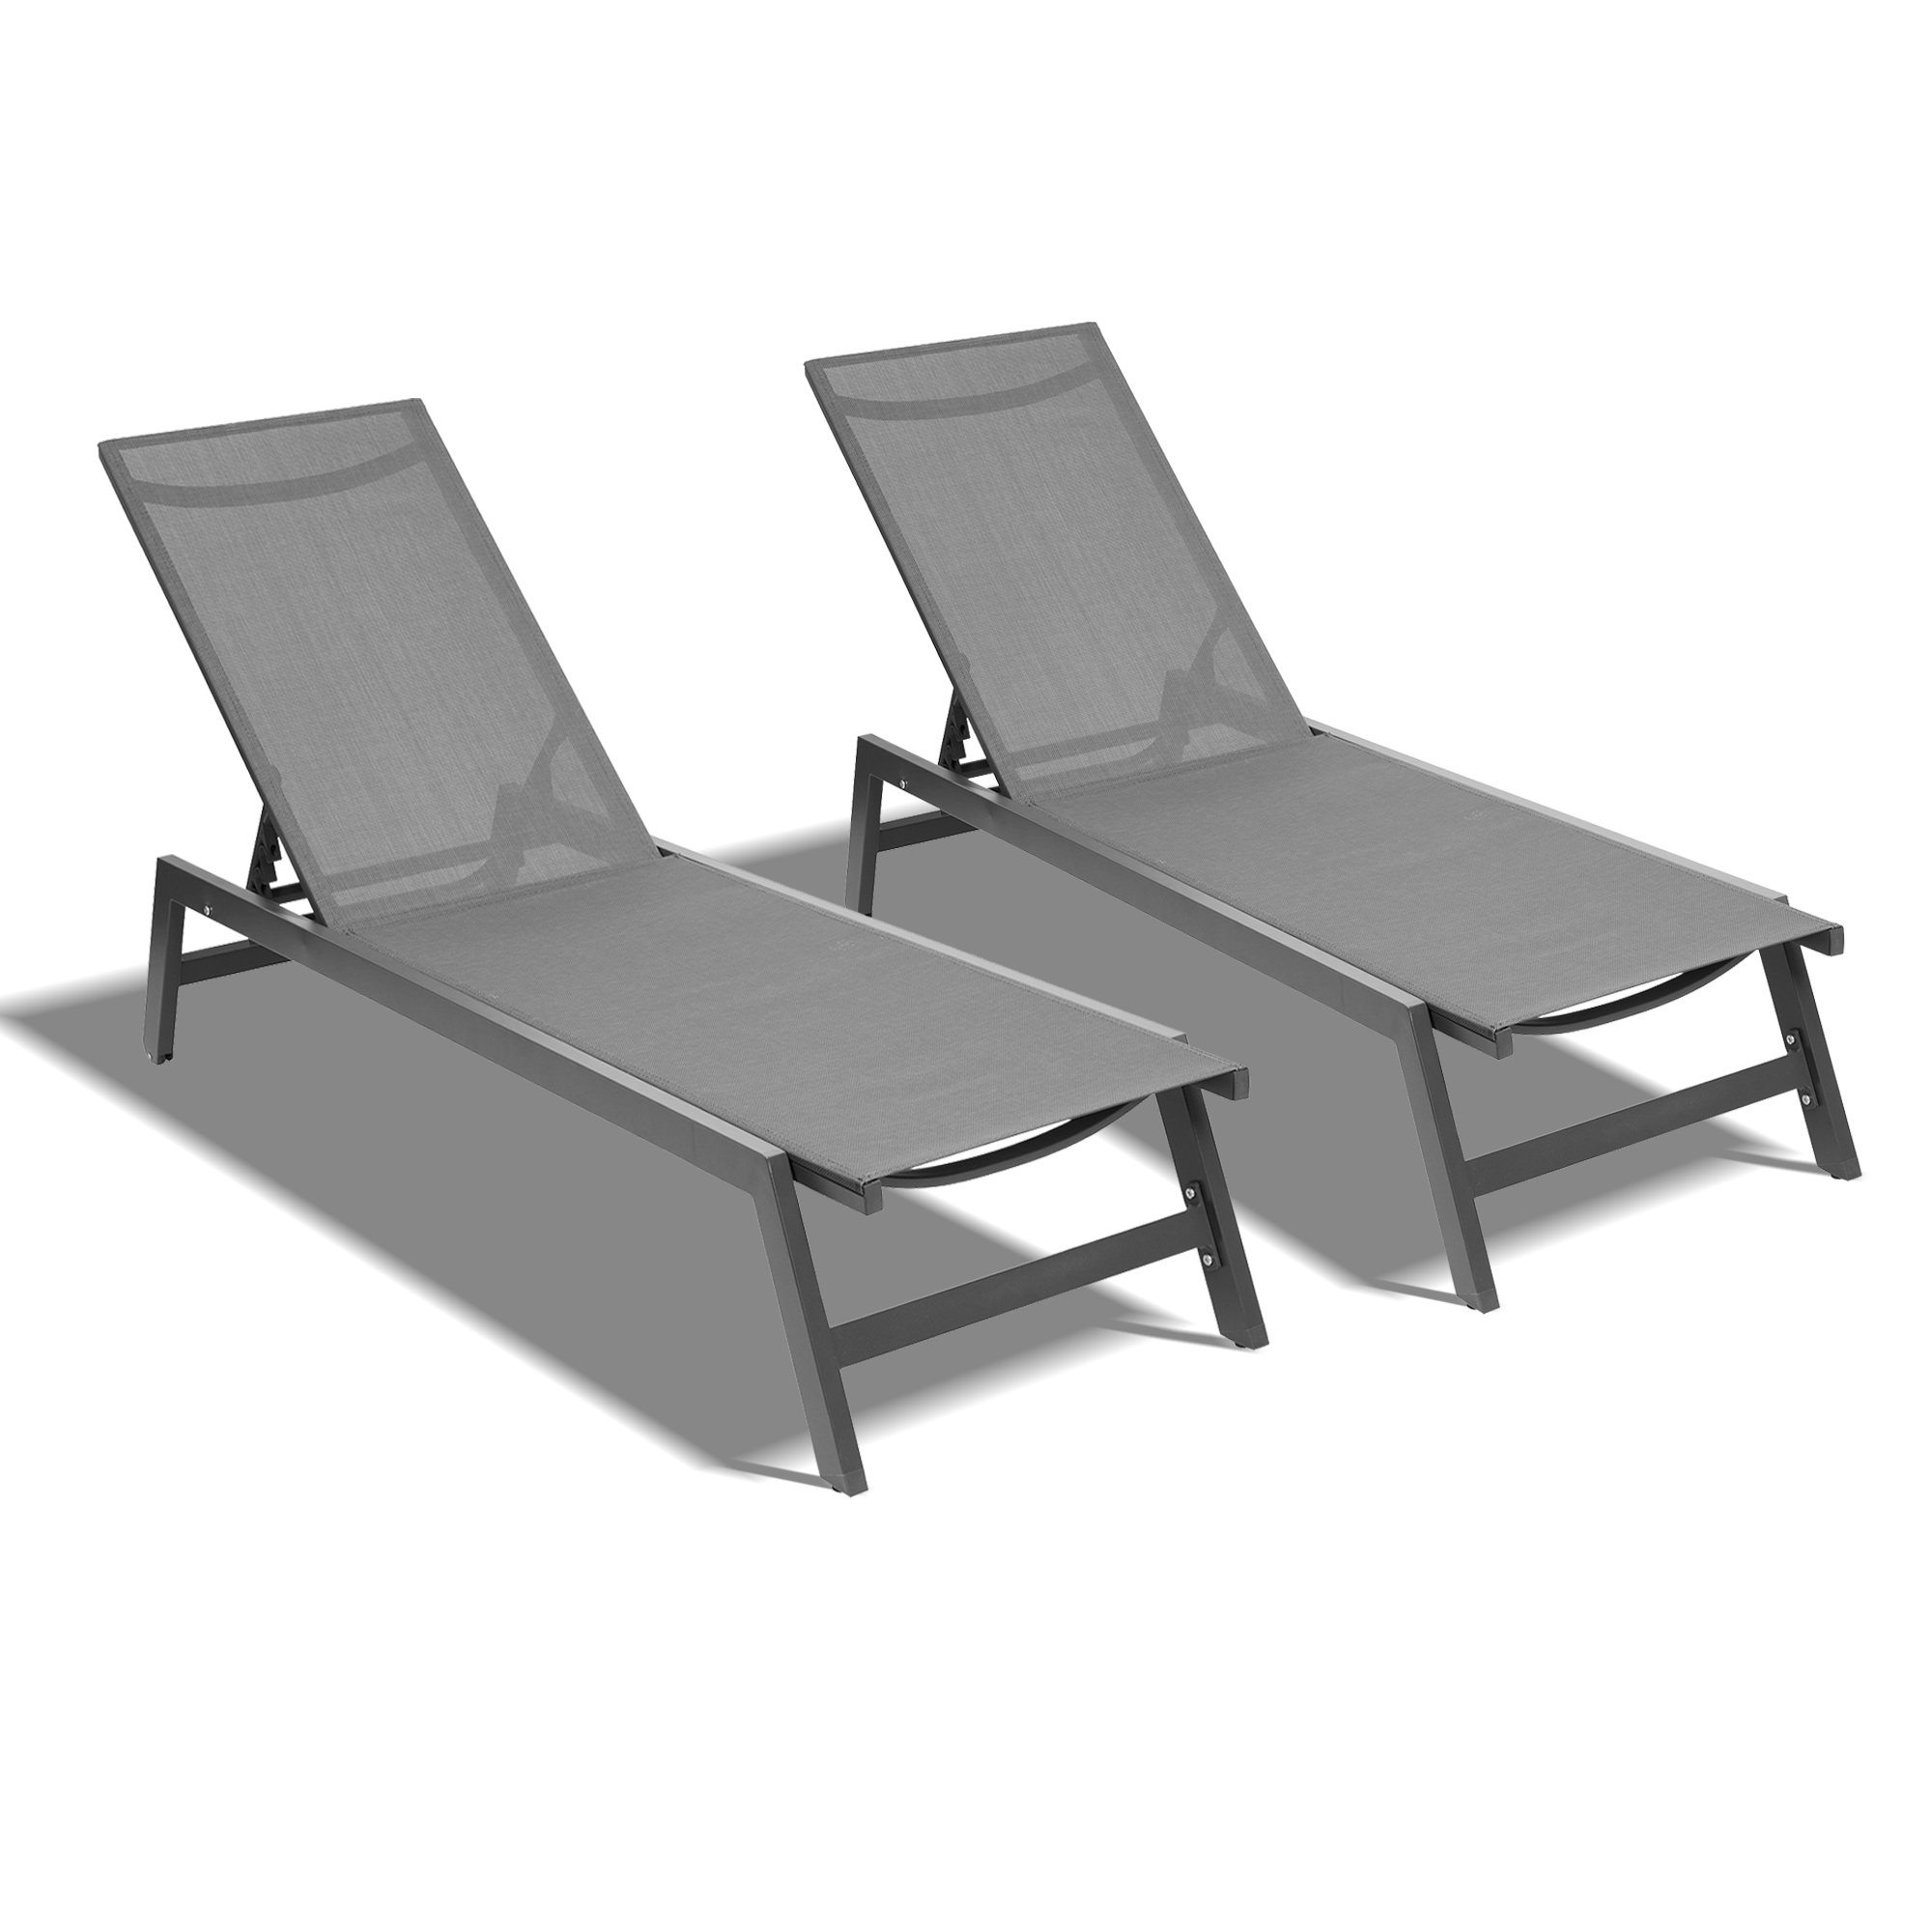 Outdoor 2-Pcs Set Chaise Lounge Chairs,Five-Position Adjustable Aluminum Recliner,All Weather For Patio,Beach,Yard, Pool(Grey Frame/Dark Grey Fabric)-Boyel Living